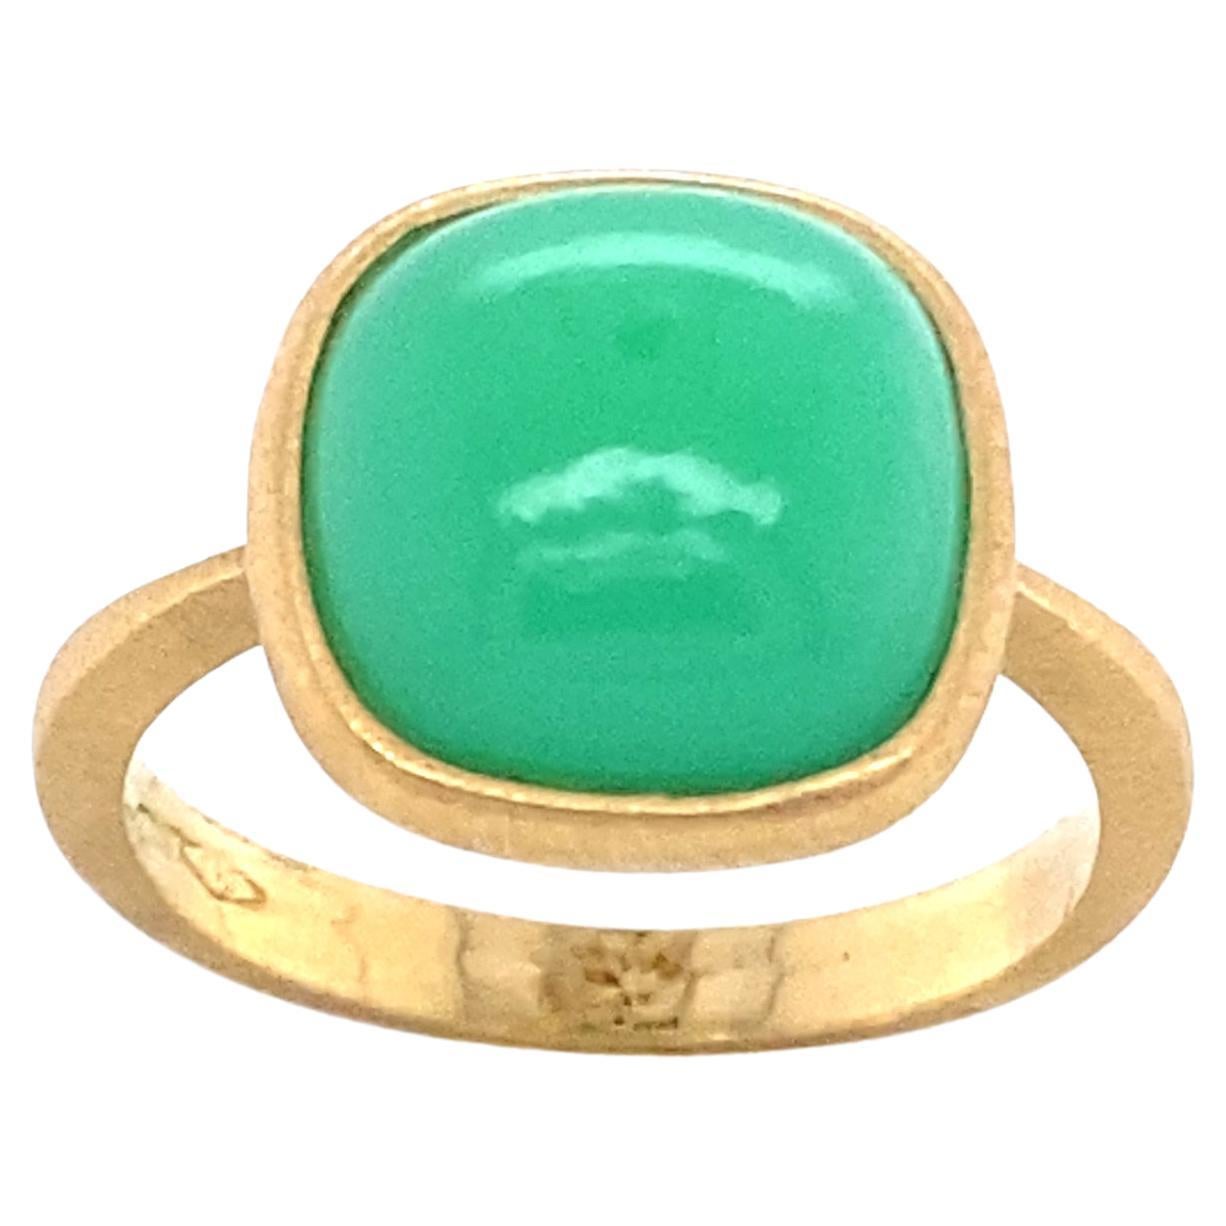 Brushed Yellow Gold with a Cabochon Crisaprasio Cocktail Ring For Sale